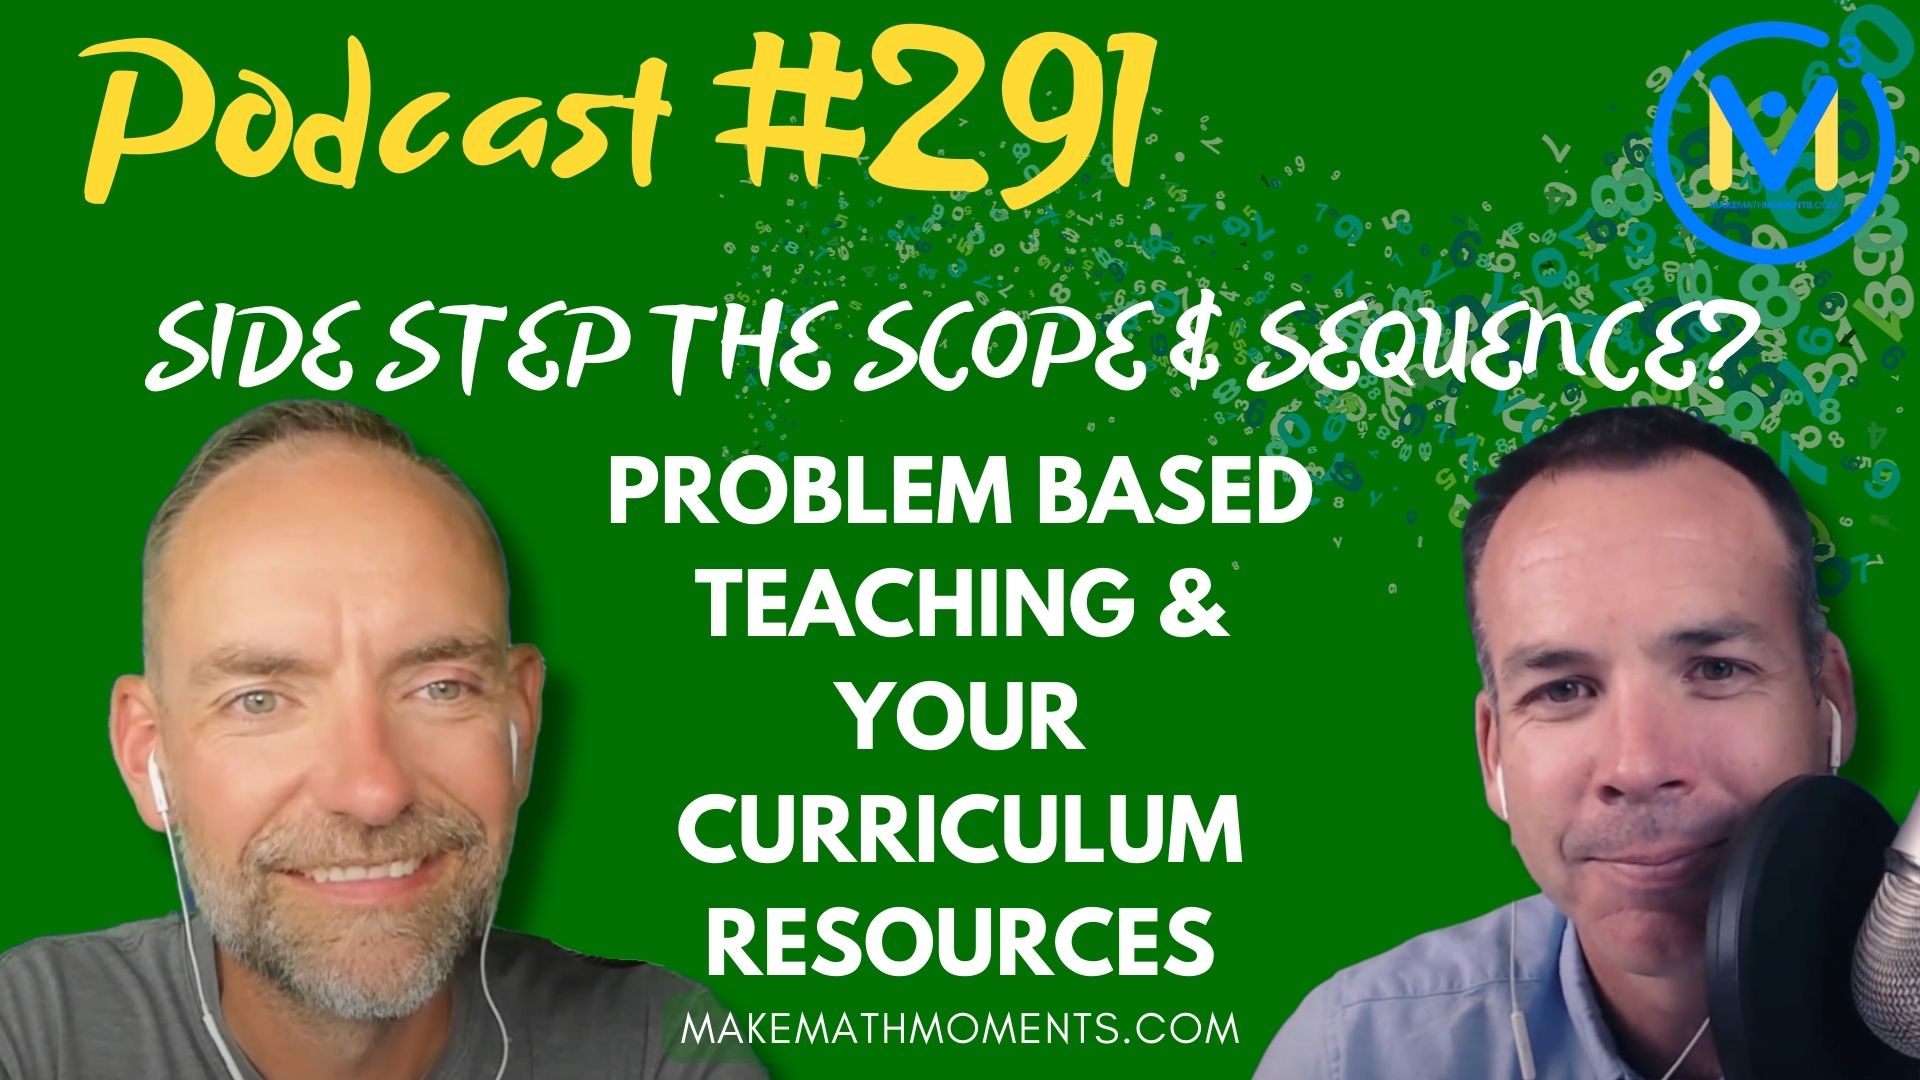 Episode #291: Side Step The Scope & Sequence? Problem Based Teaching & Your Curriculum Resources